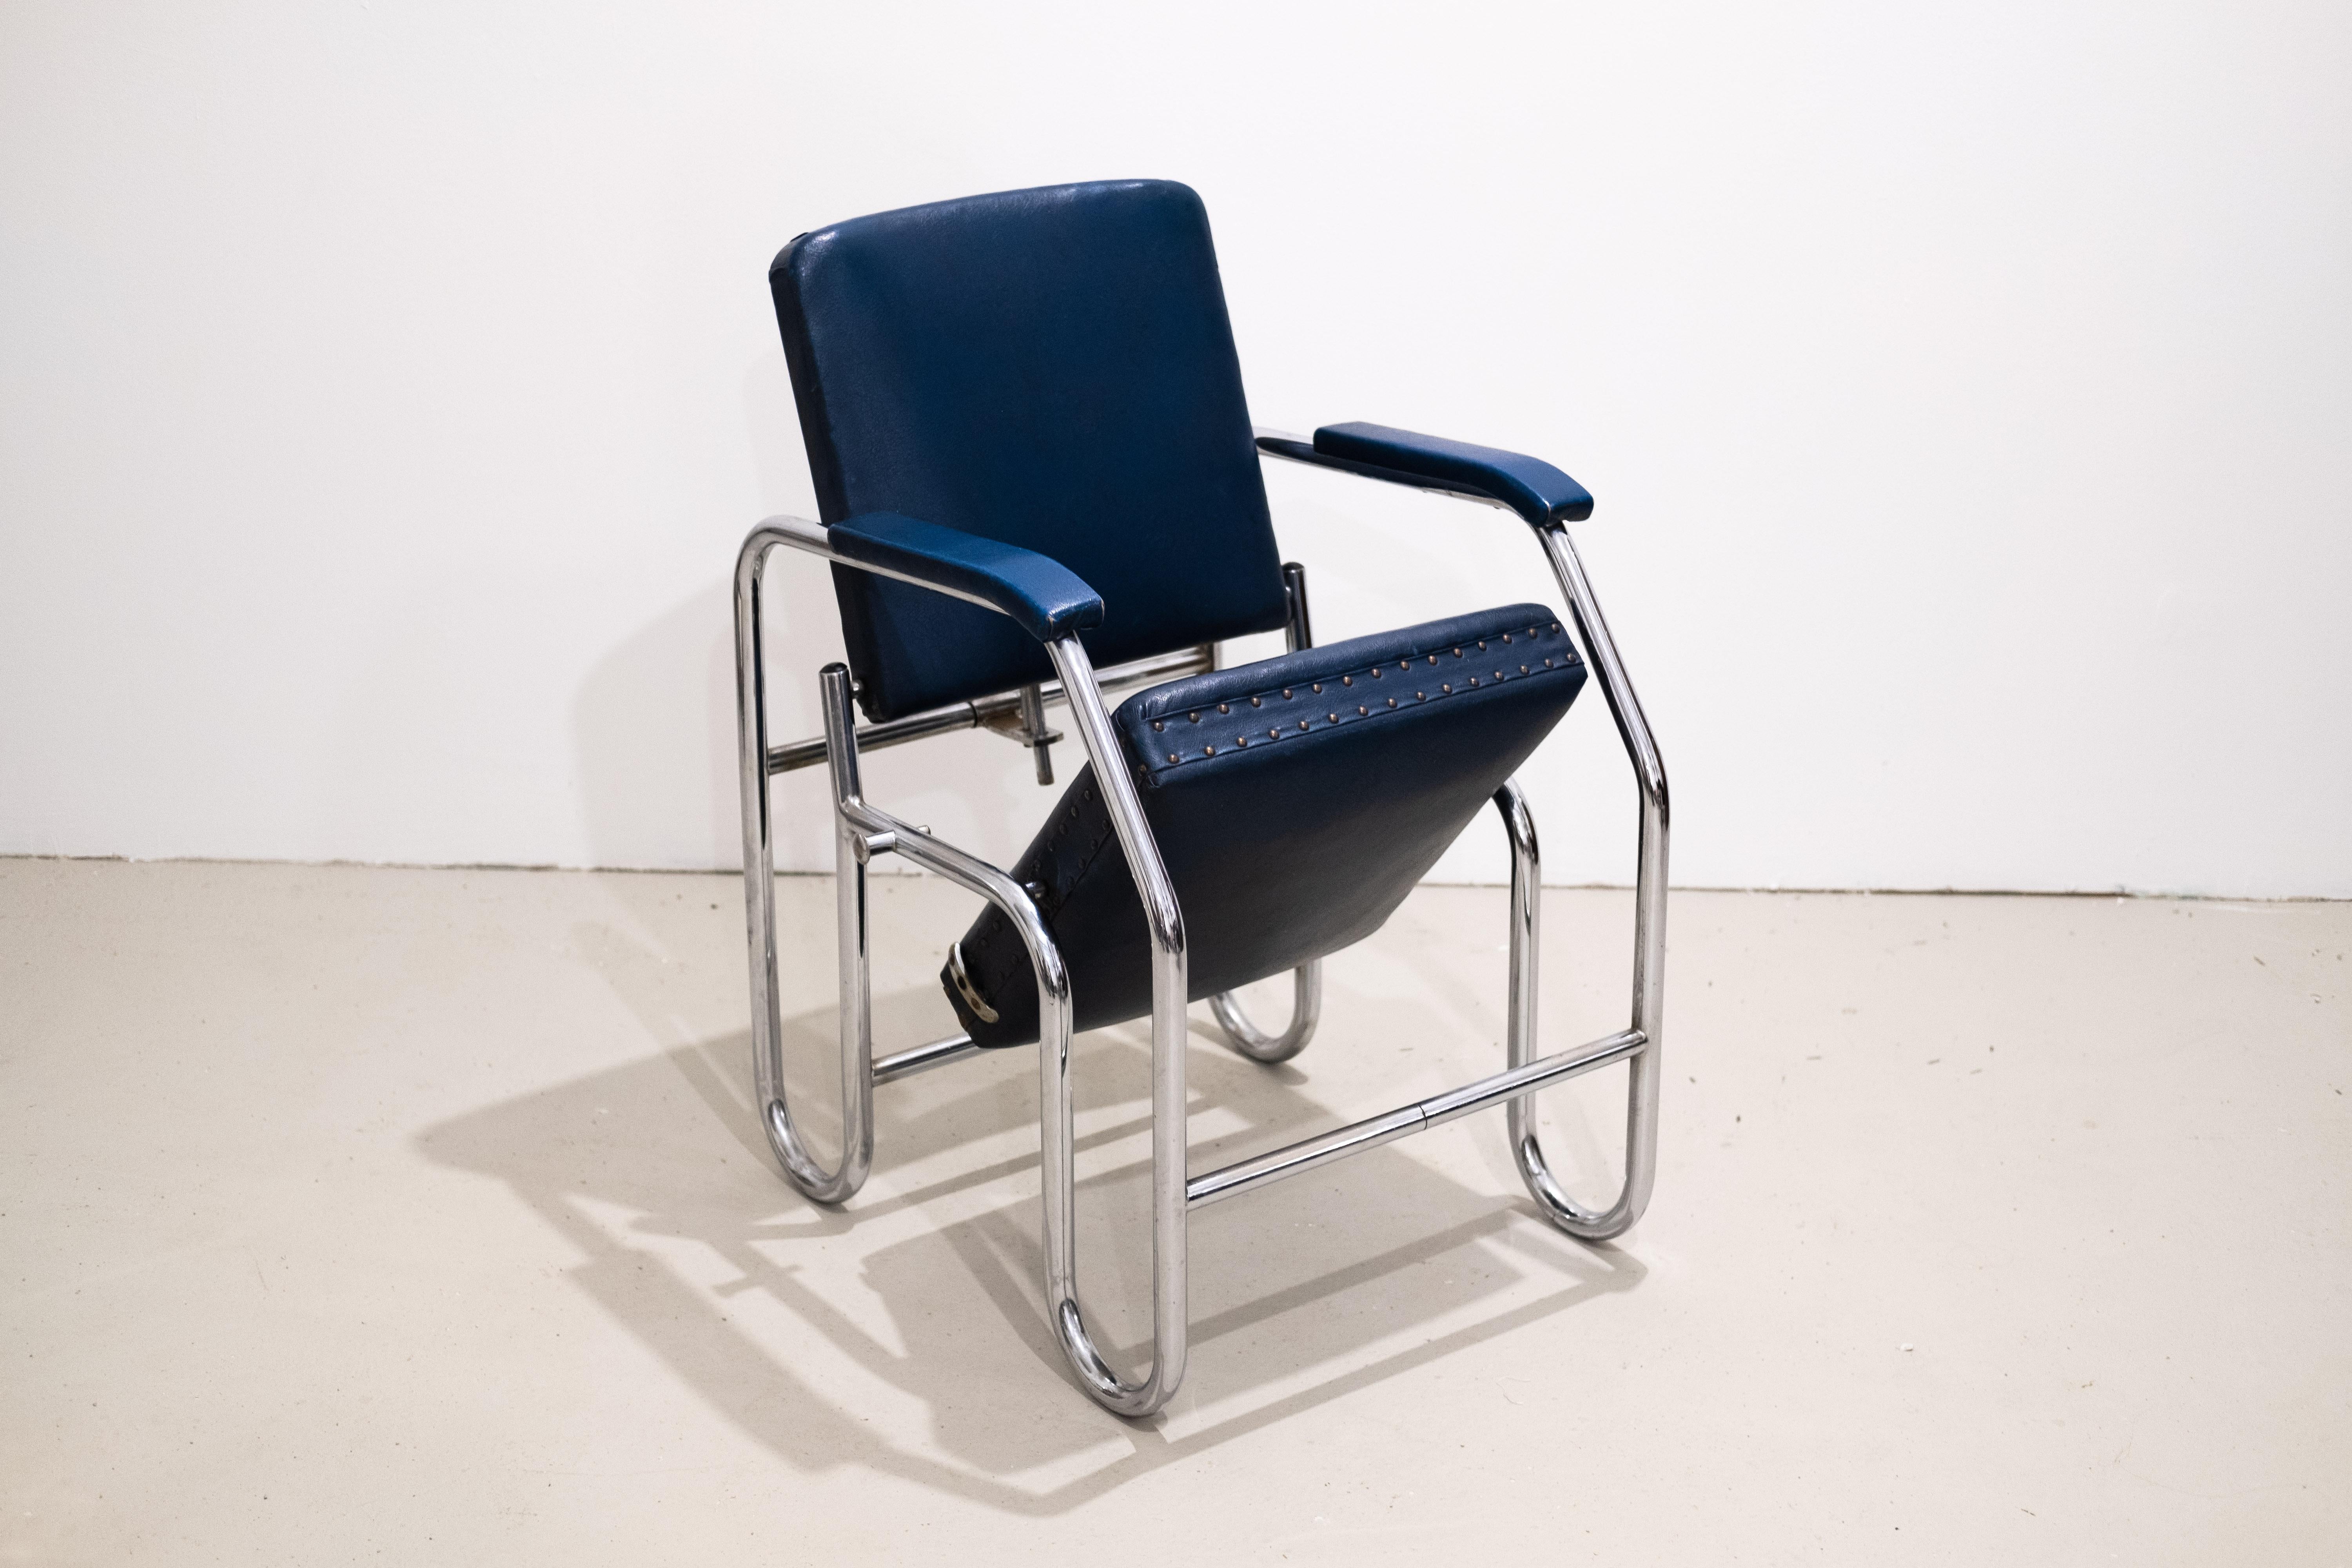 Blue Bauhaus Steelpipe Armchair with rotatable Seat (Amsterdam, 1930) For Sale 2